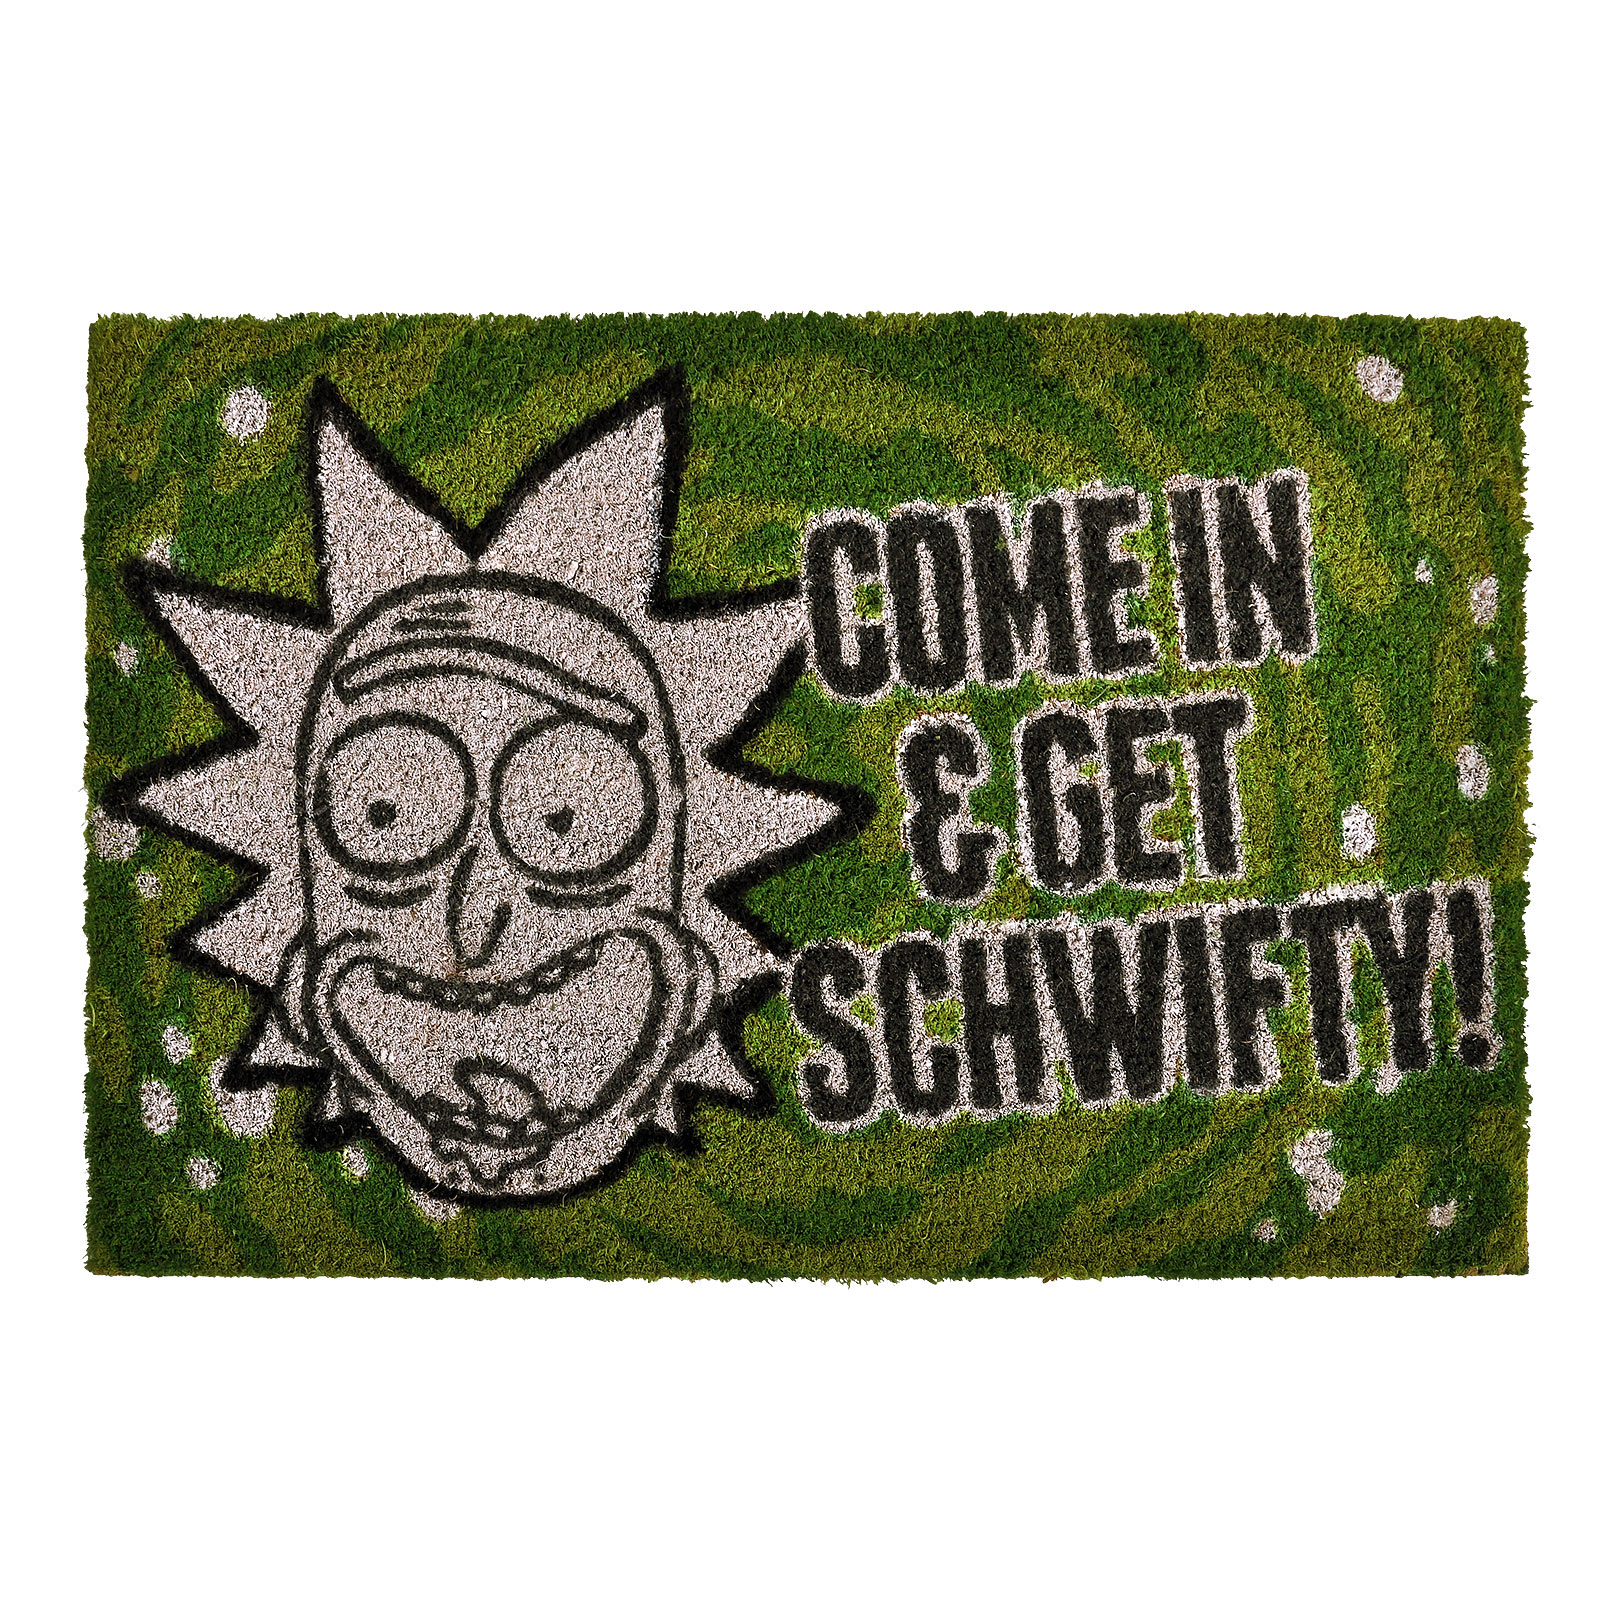 Rick and Morty - Get Schwifty Fußmatte